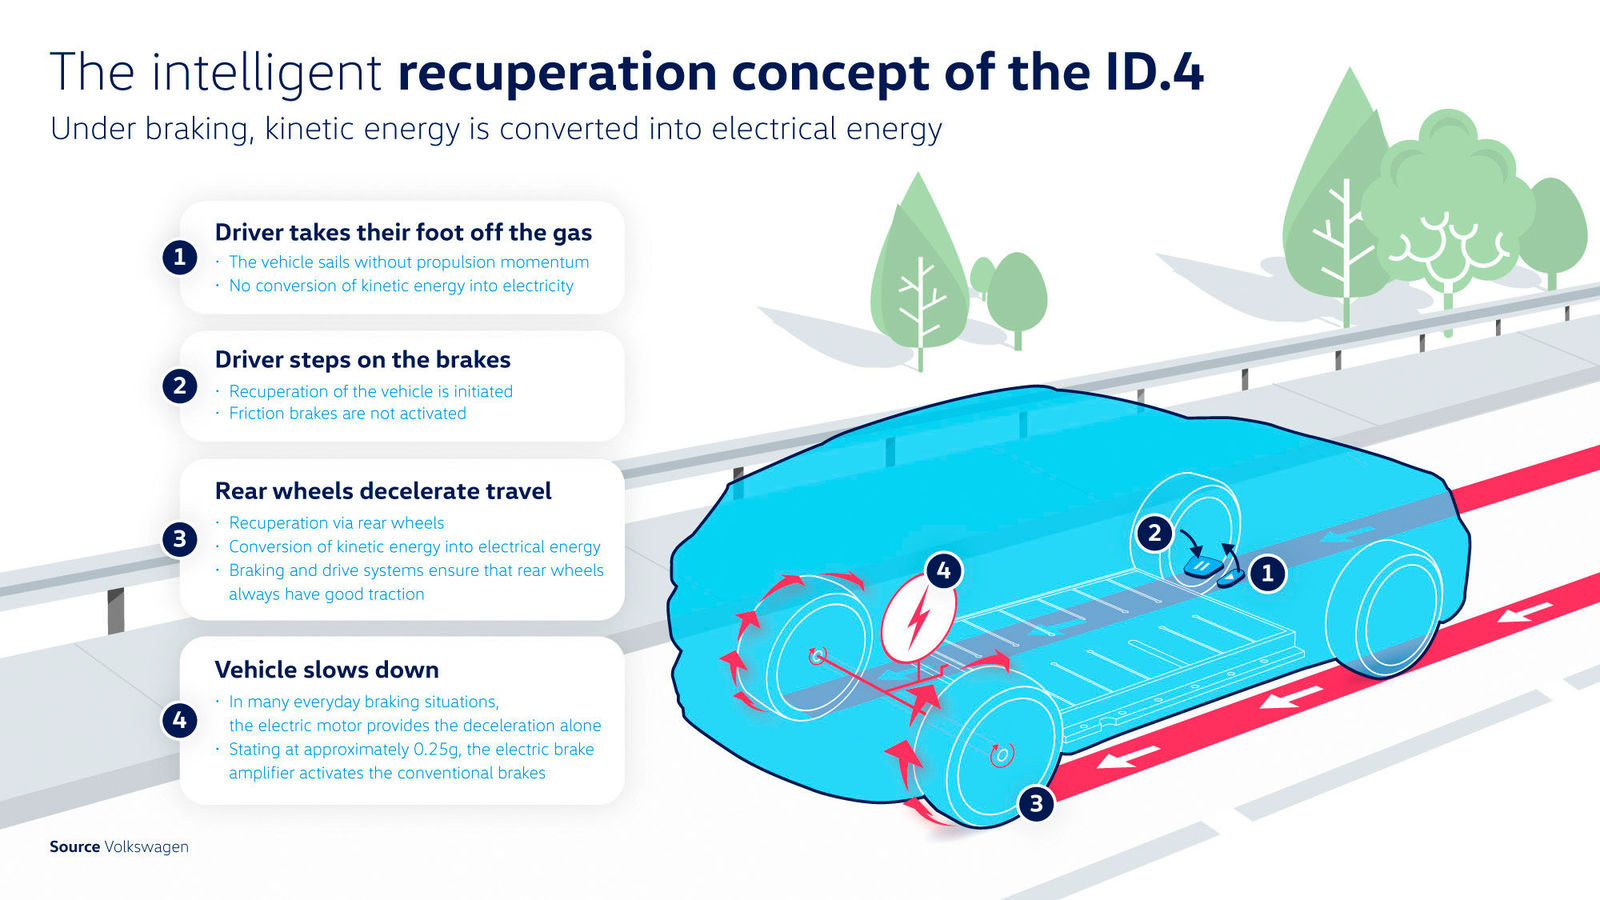 Brake or coast? The ID.4’s intelligent energy recuperation concept